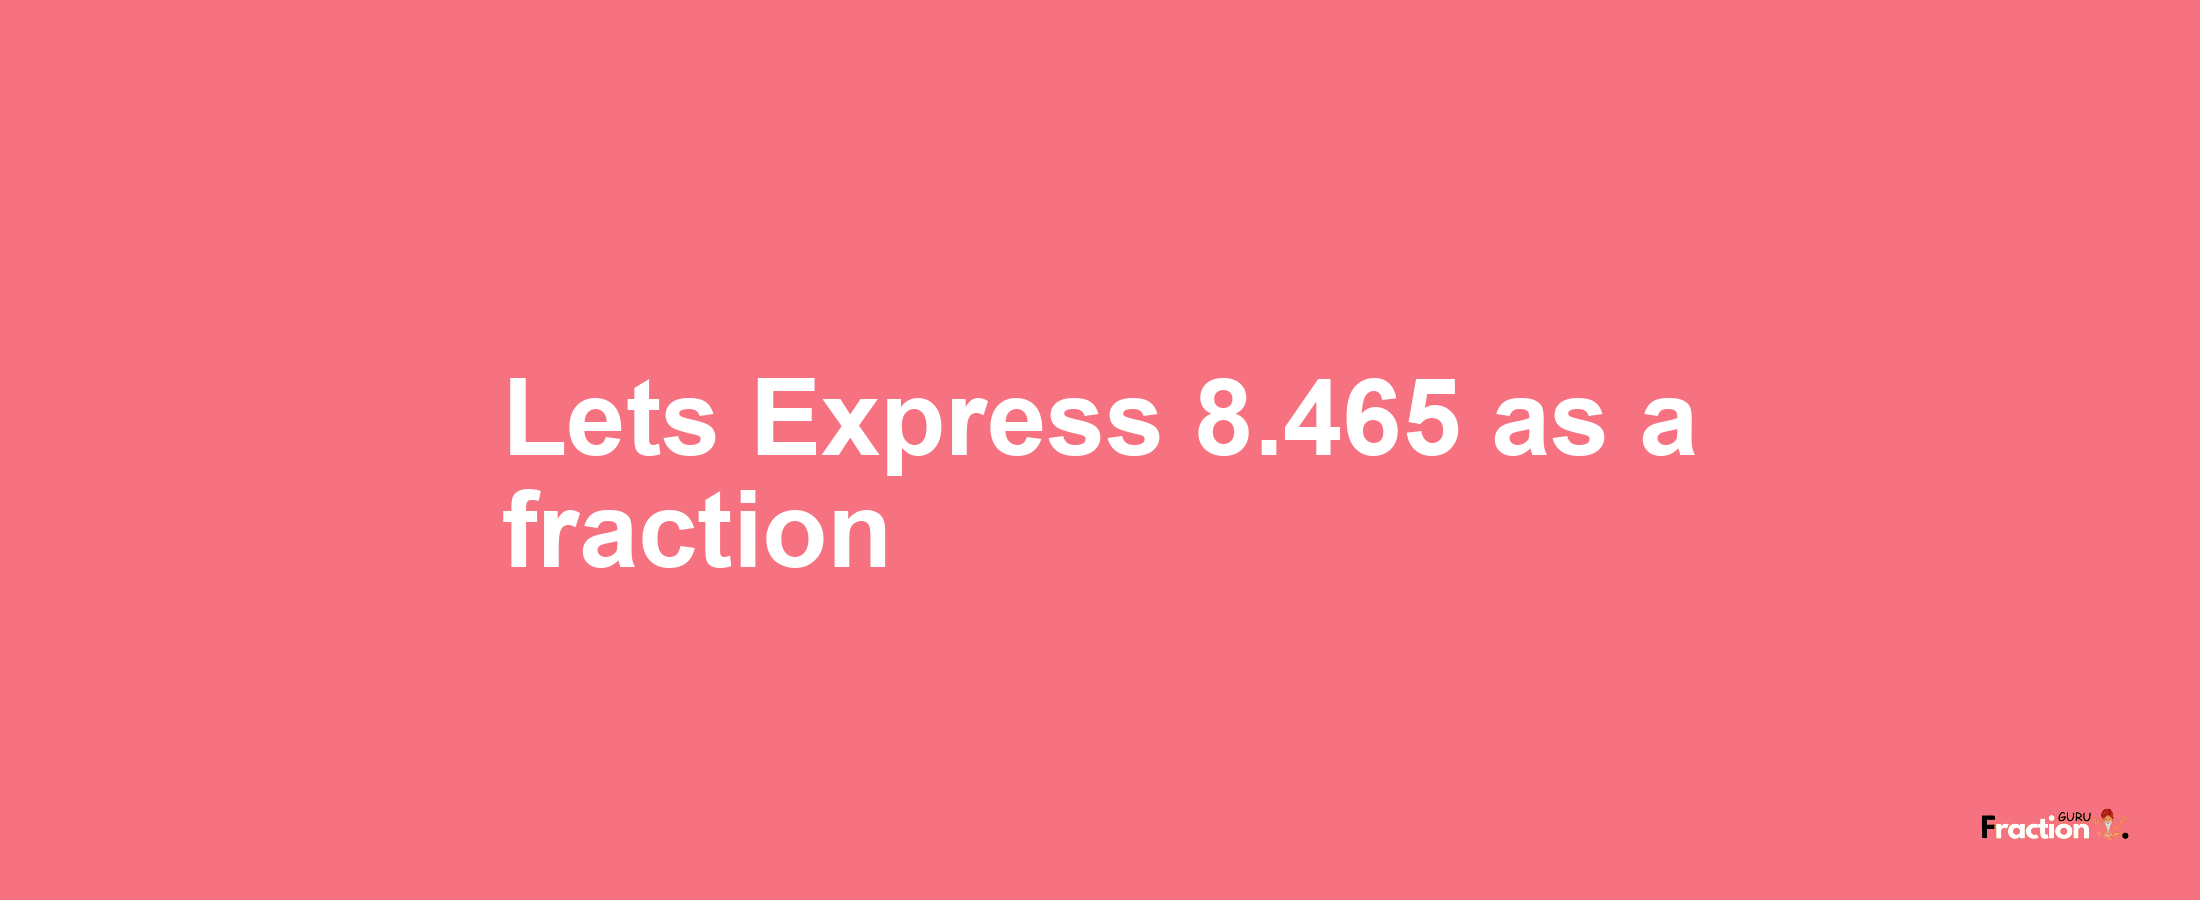 Lets Express 8.465 as afraction